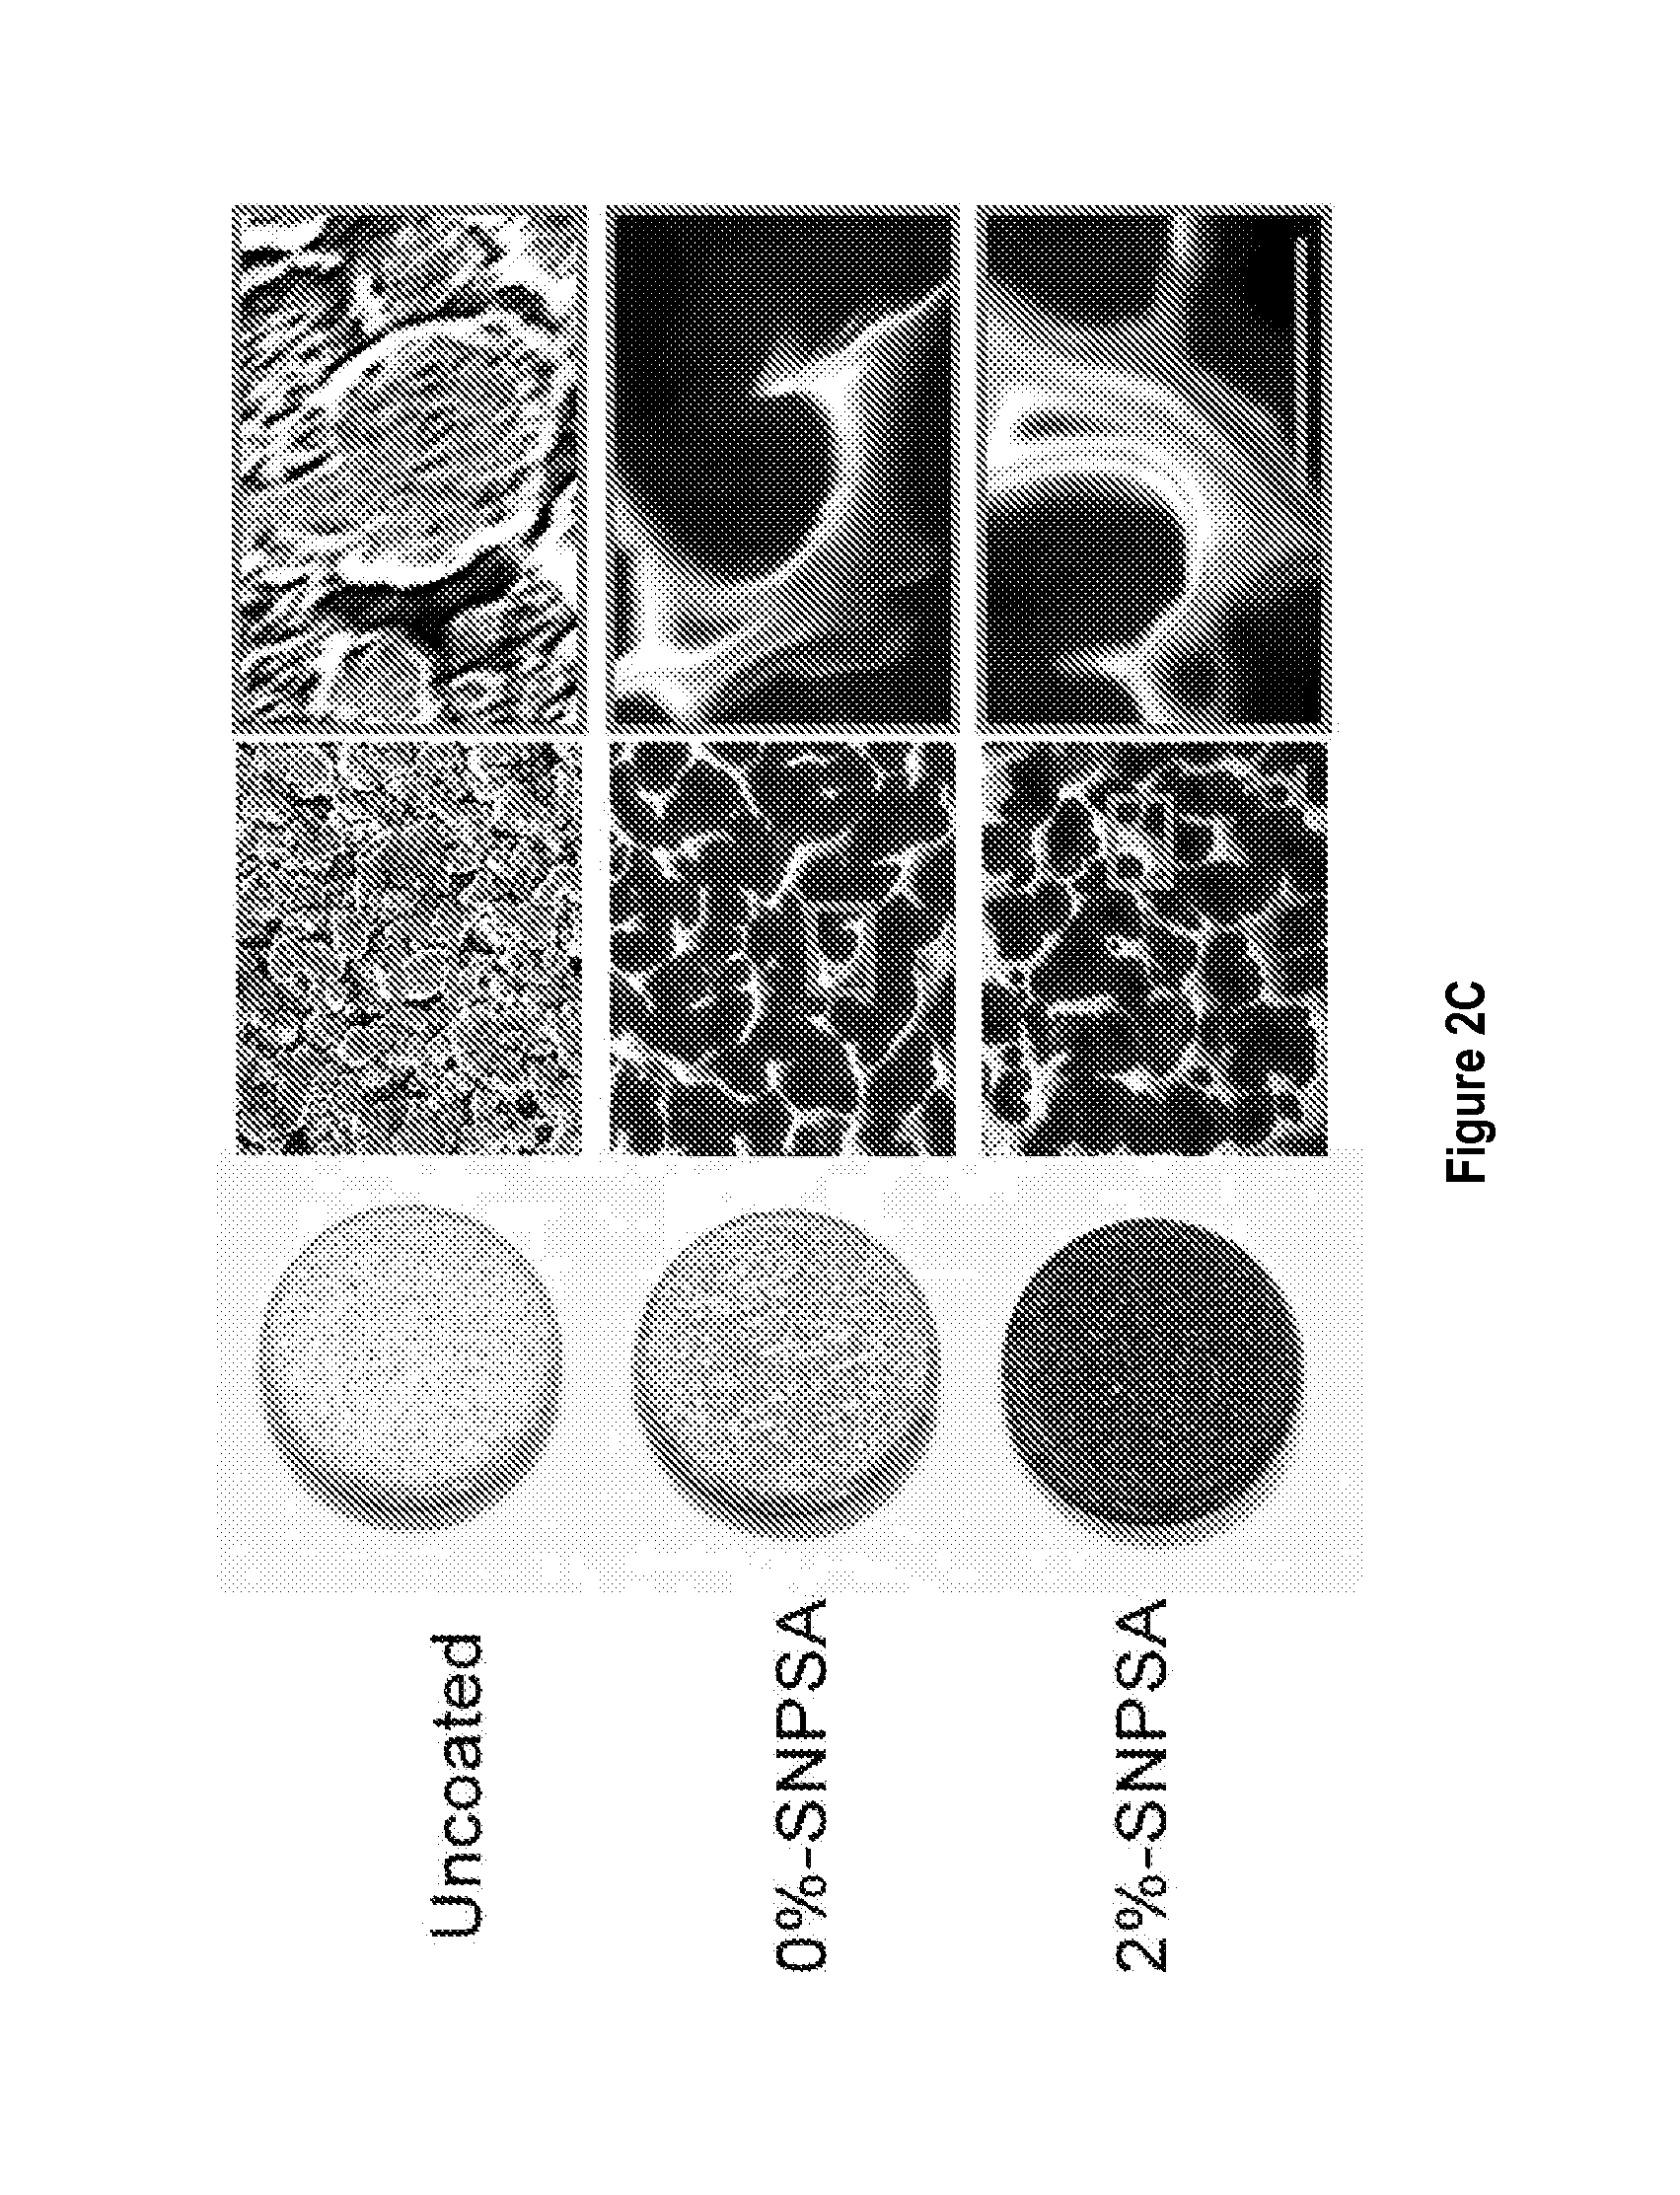 Nanoparticle-based scaffolds and implants, methods for making the same, and applications thereof